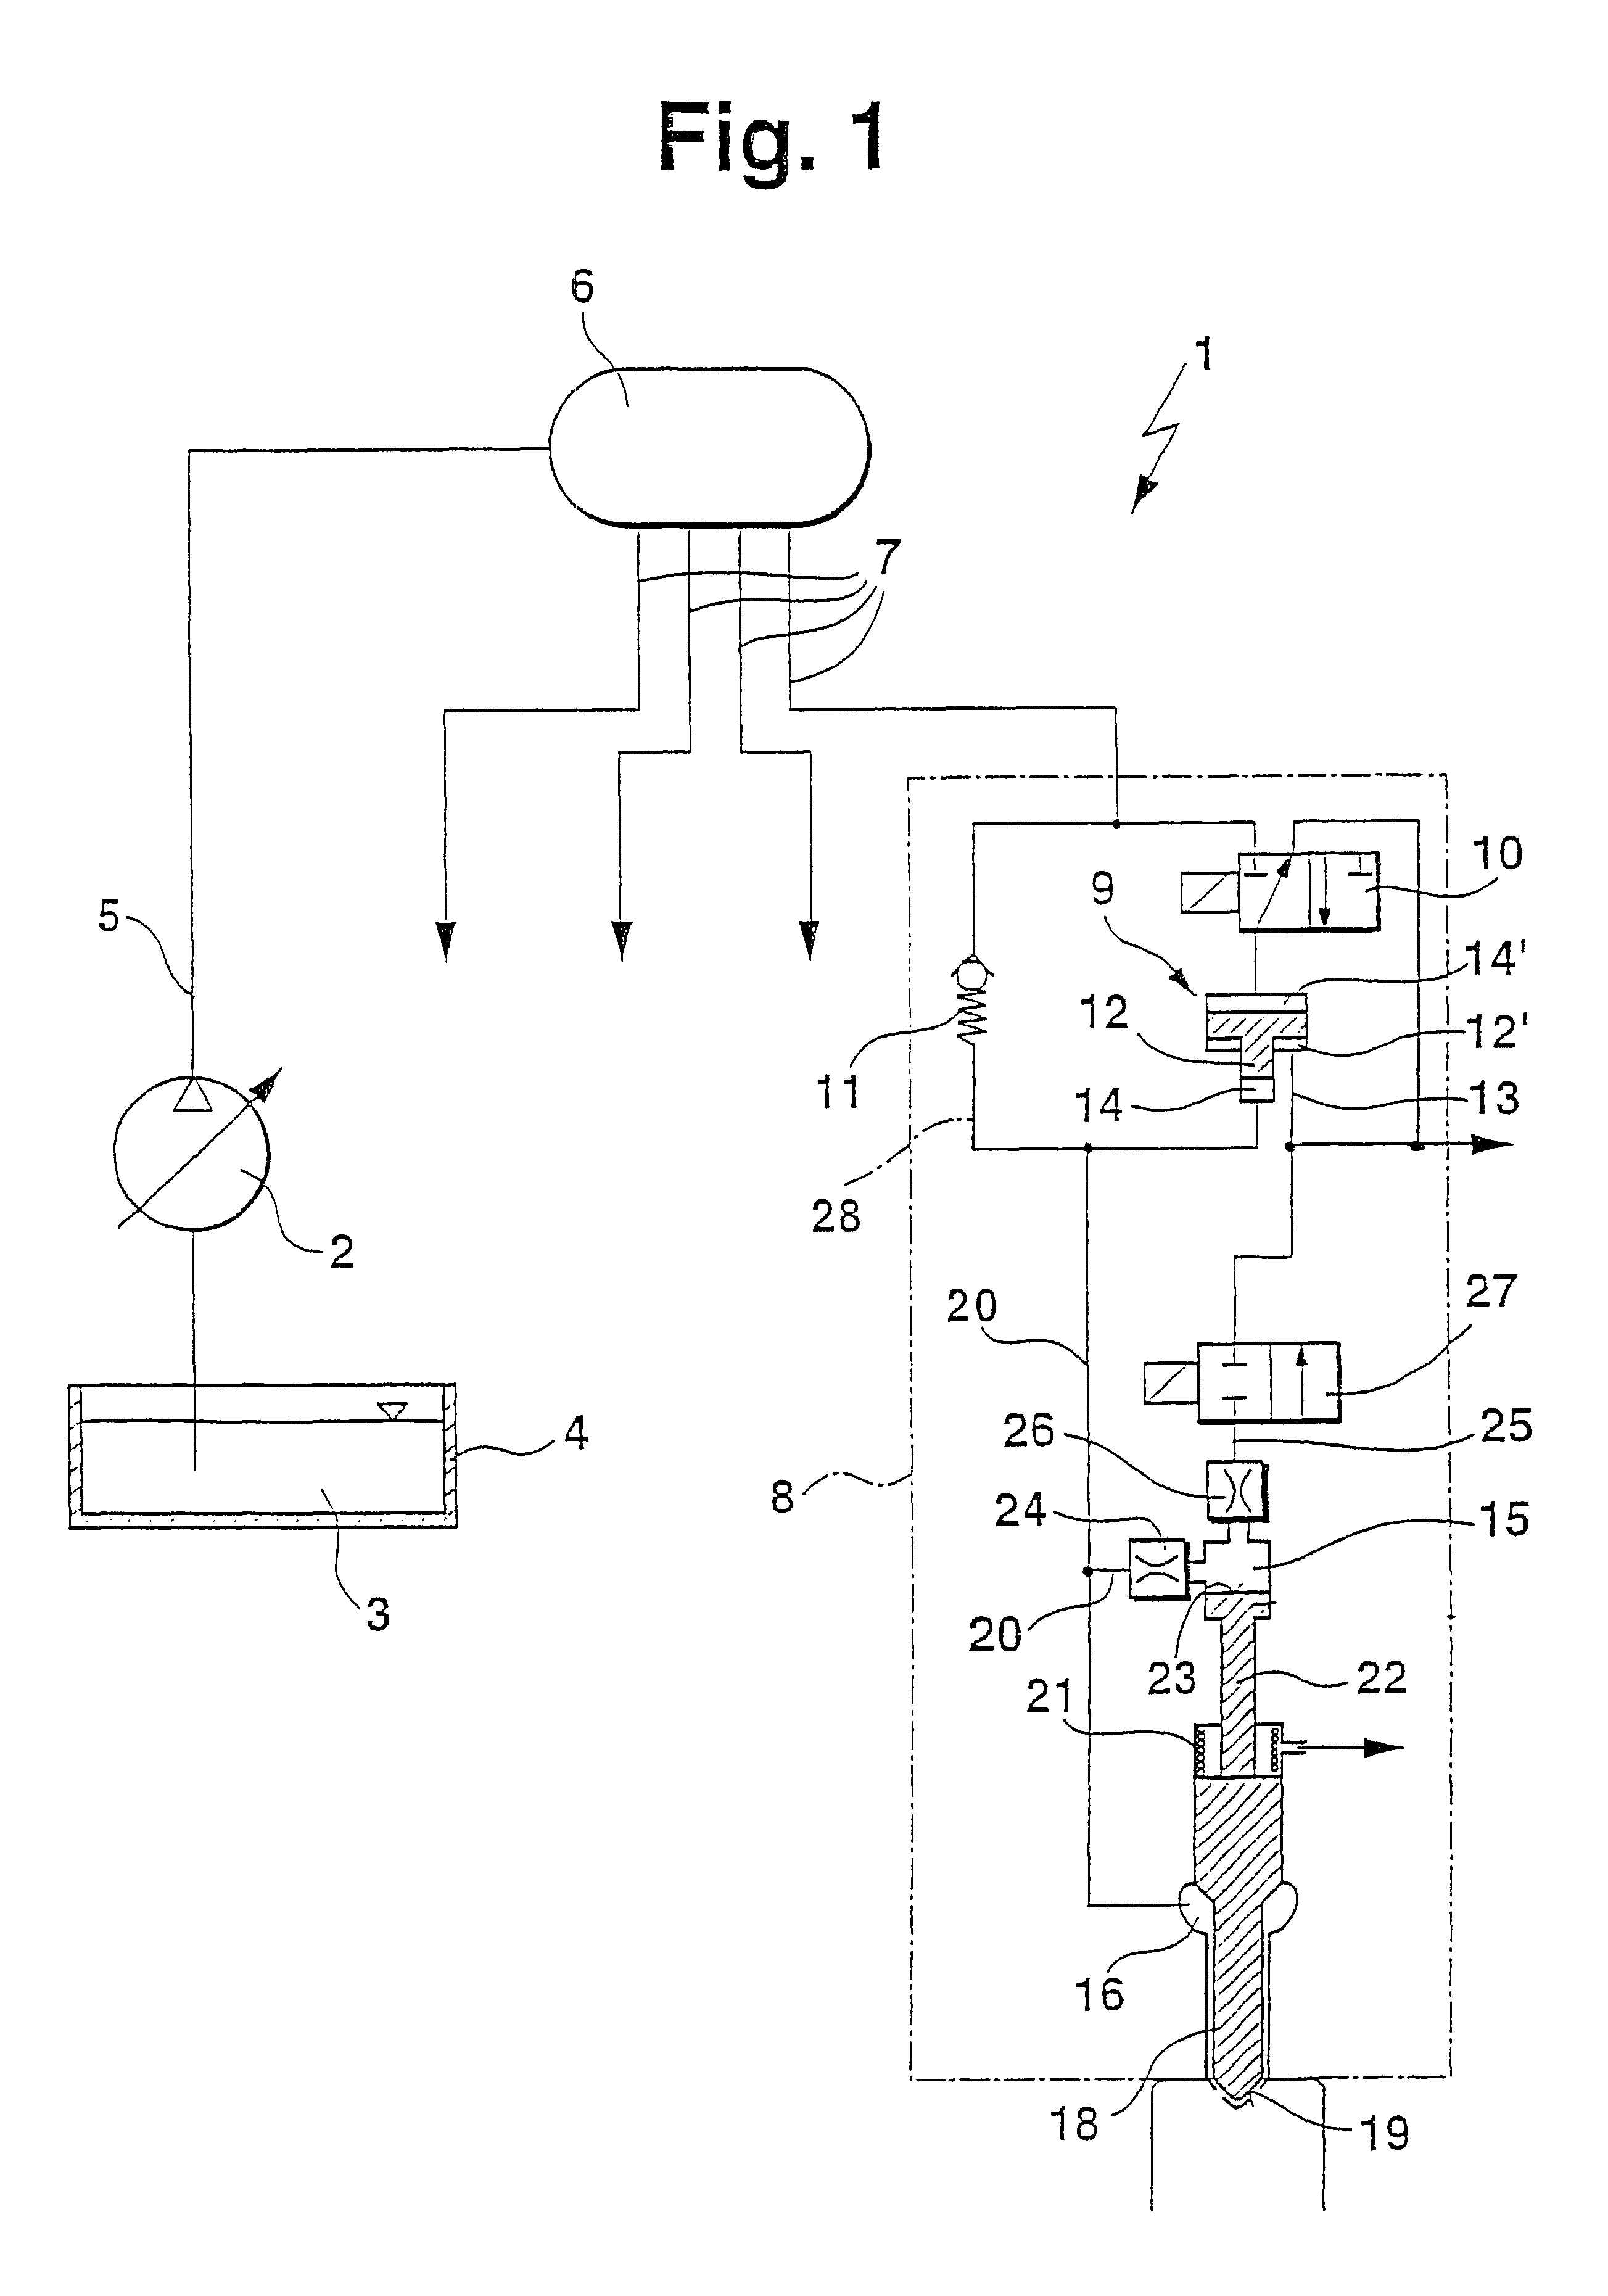 Fuel injection system which uses a pressure step-up unit